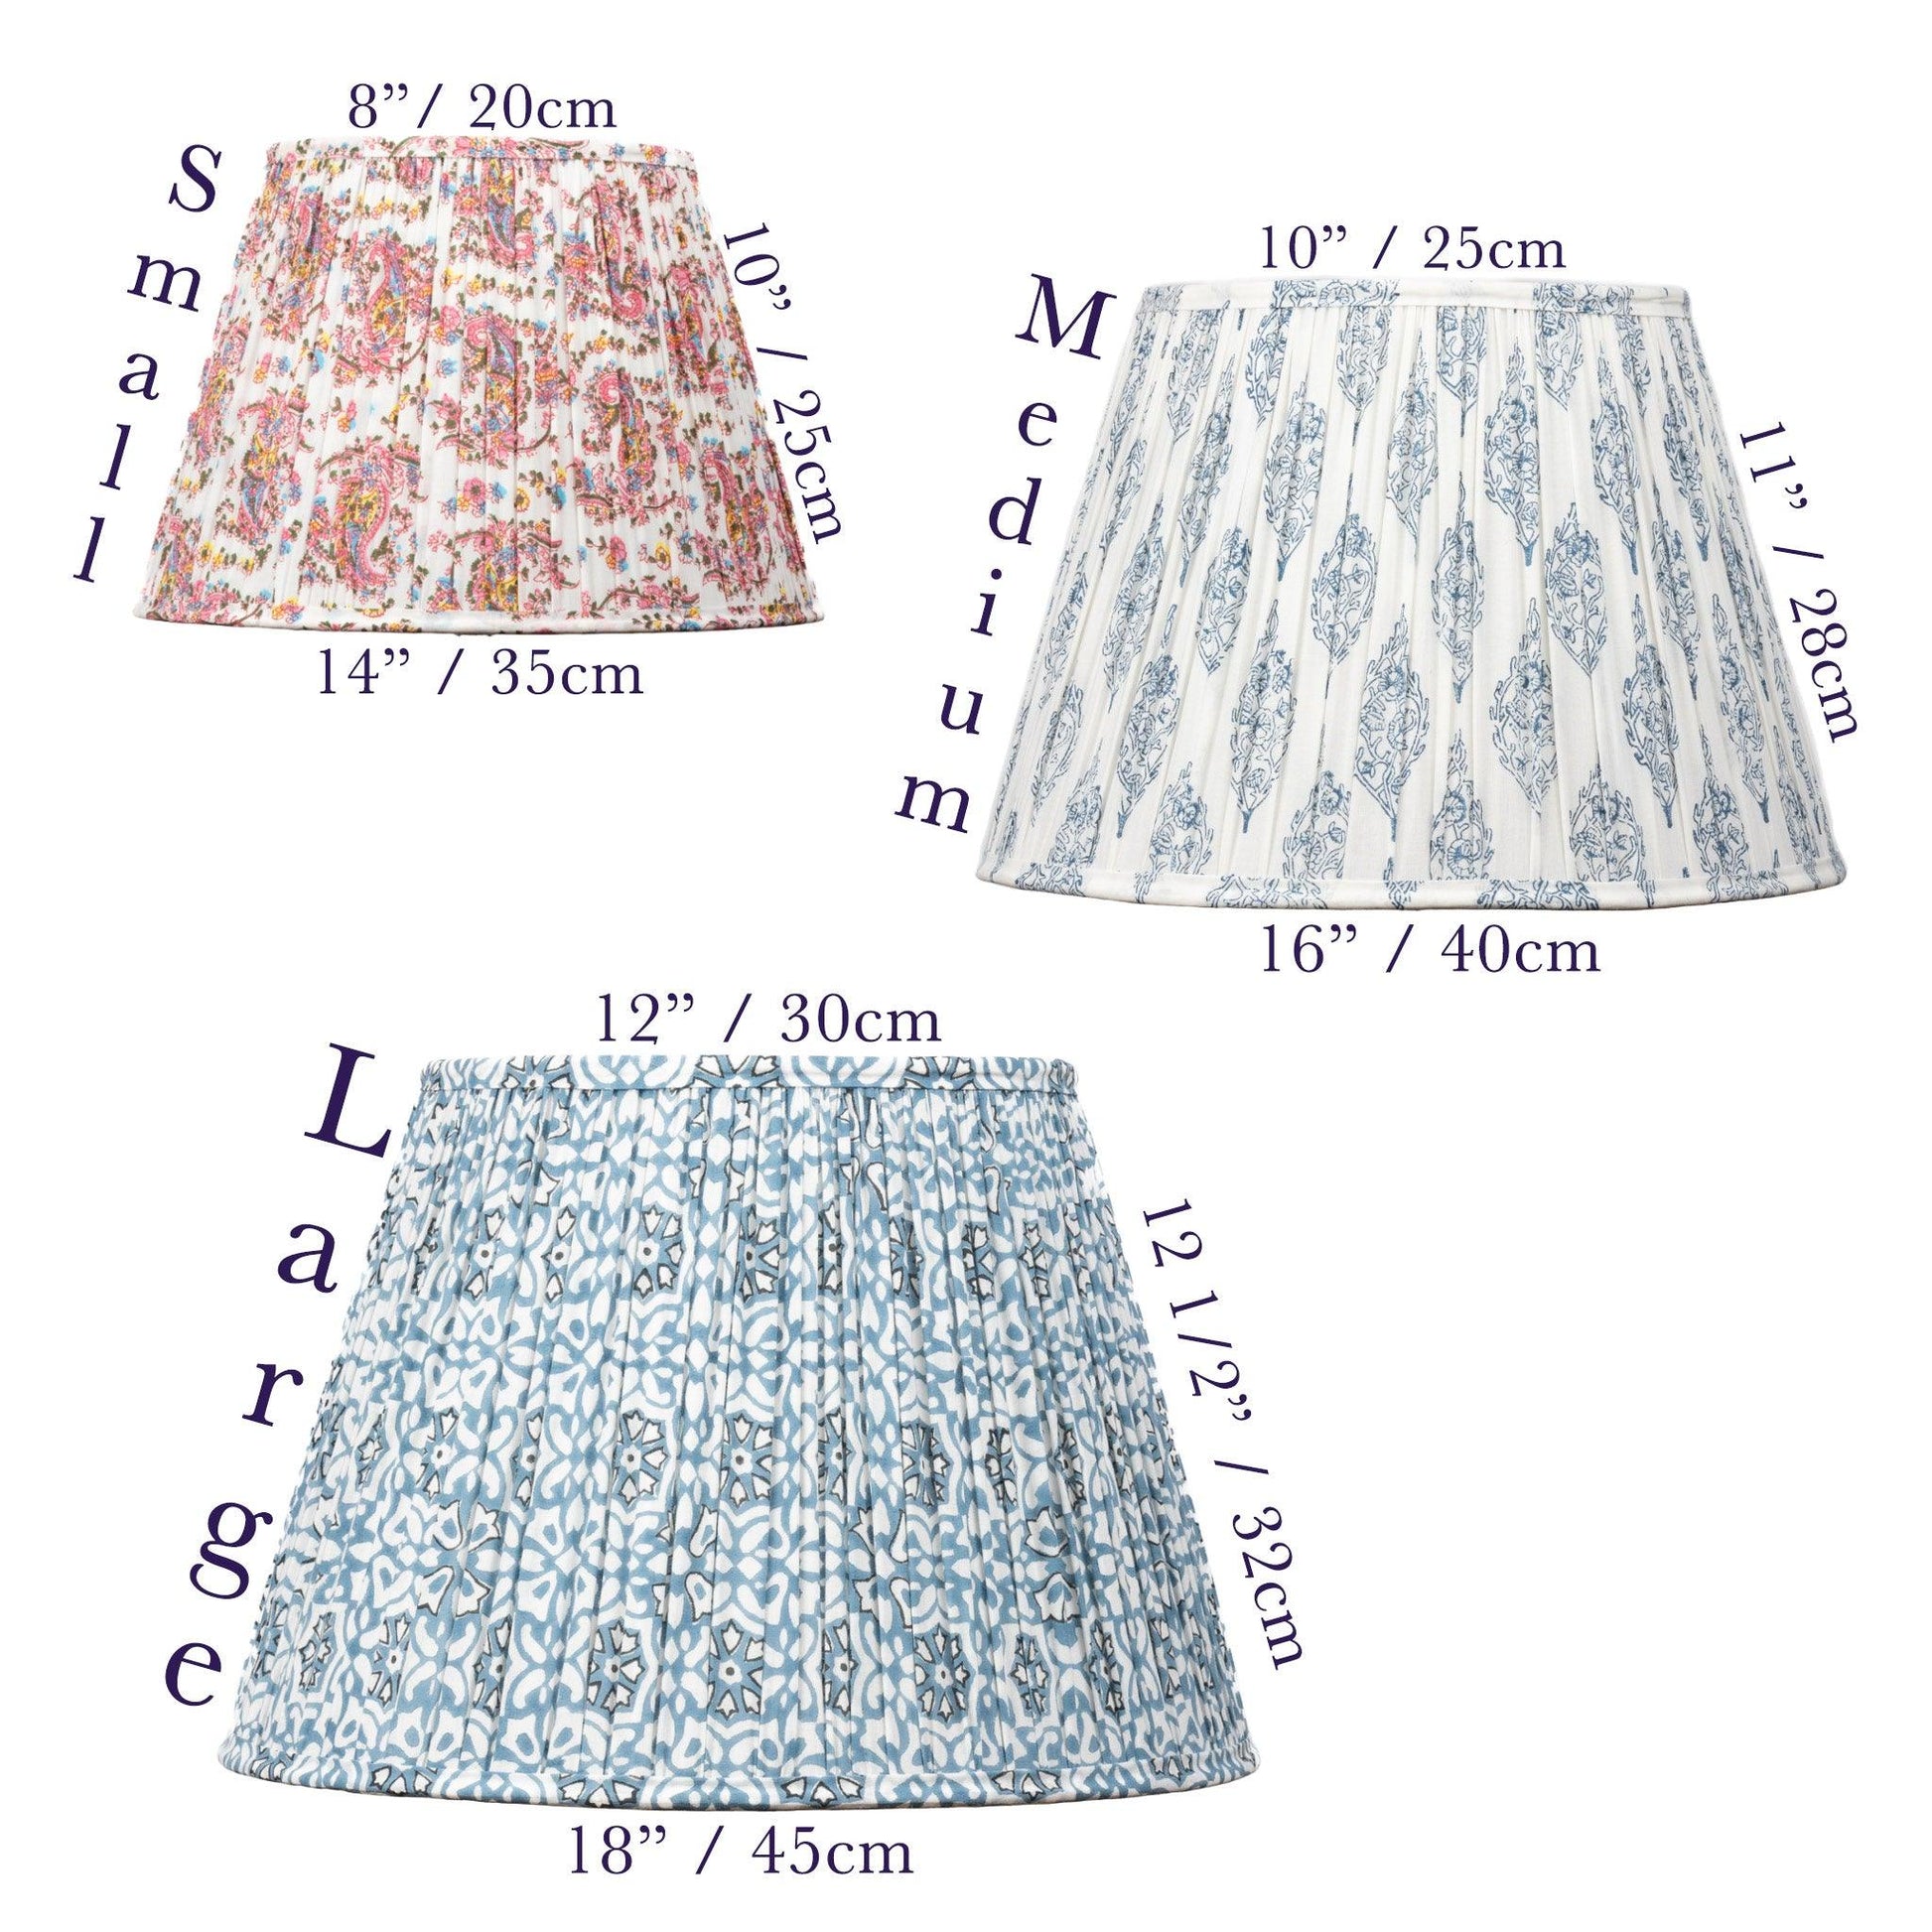 Size chart for organic cotton pleated lampshades that come in small, medium, large empire style.